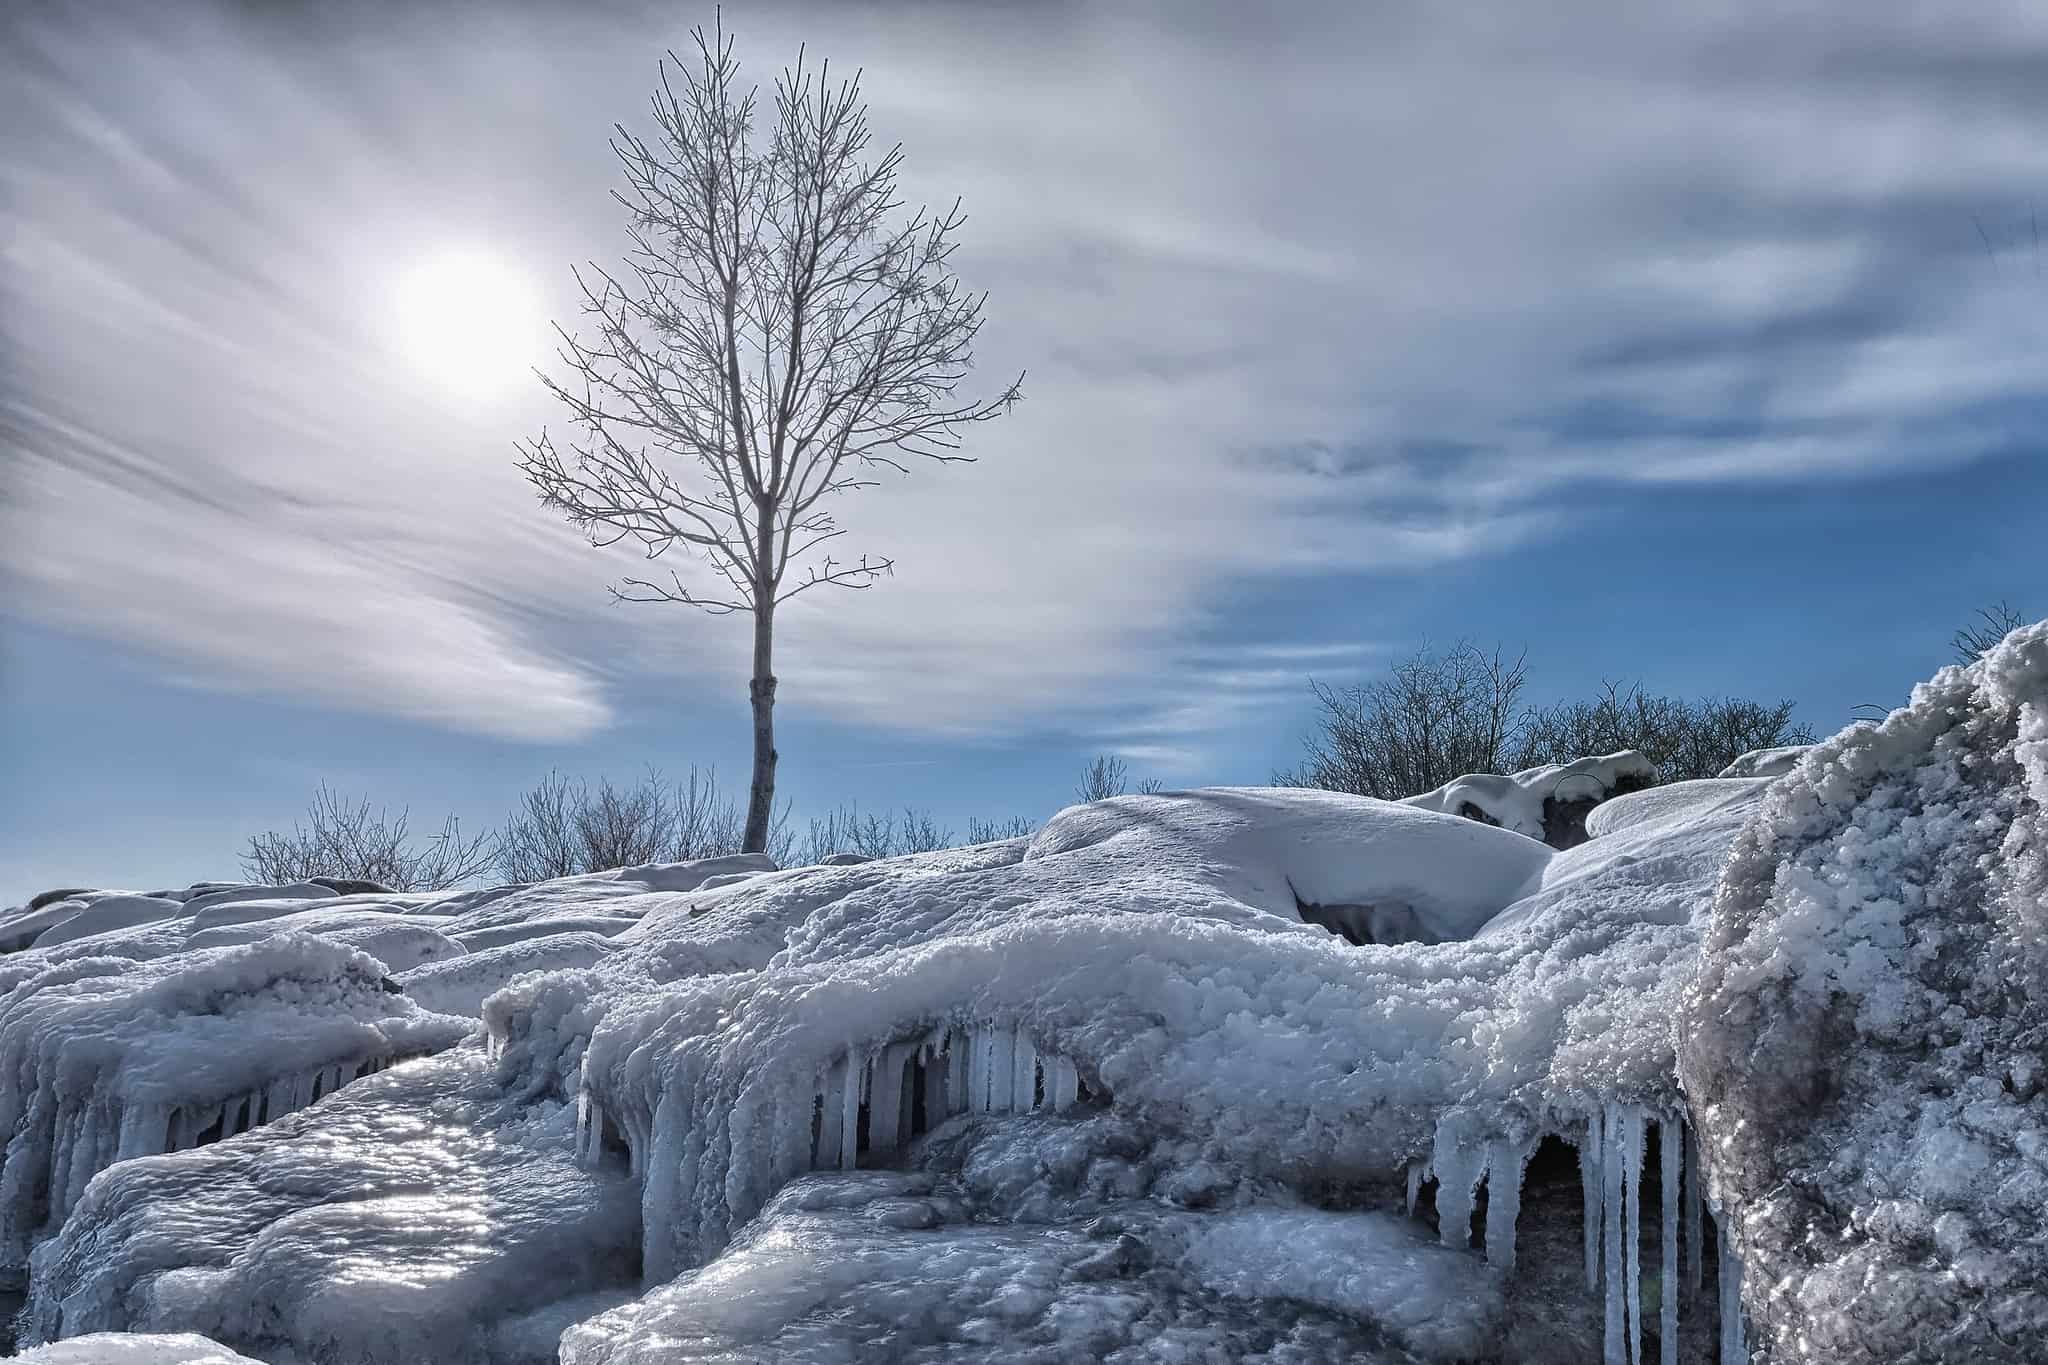 Extreme cold warning with wind chills of -30 C issued for Mississauga,  Brampton, Halton and Durham